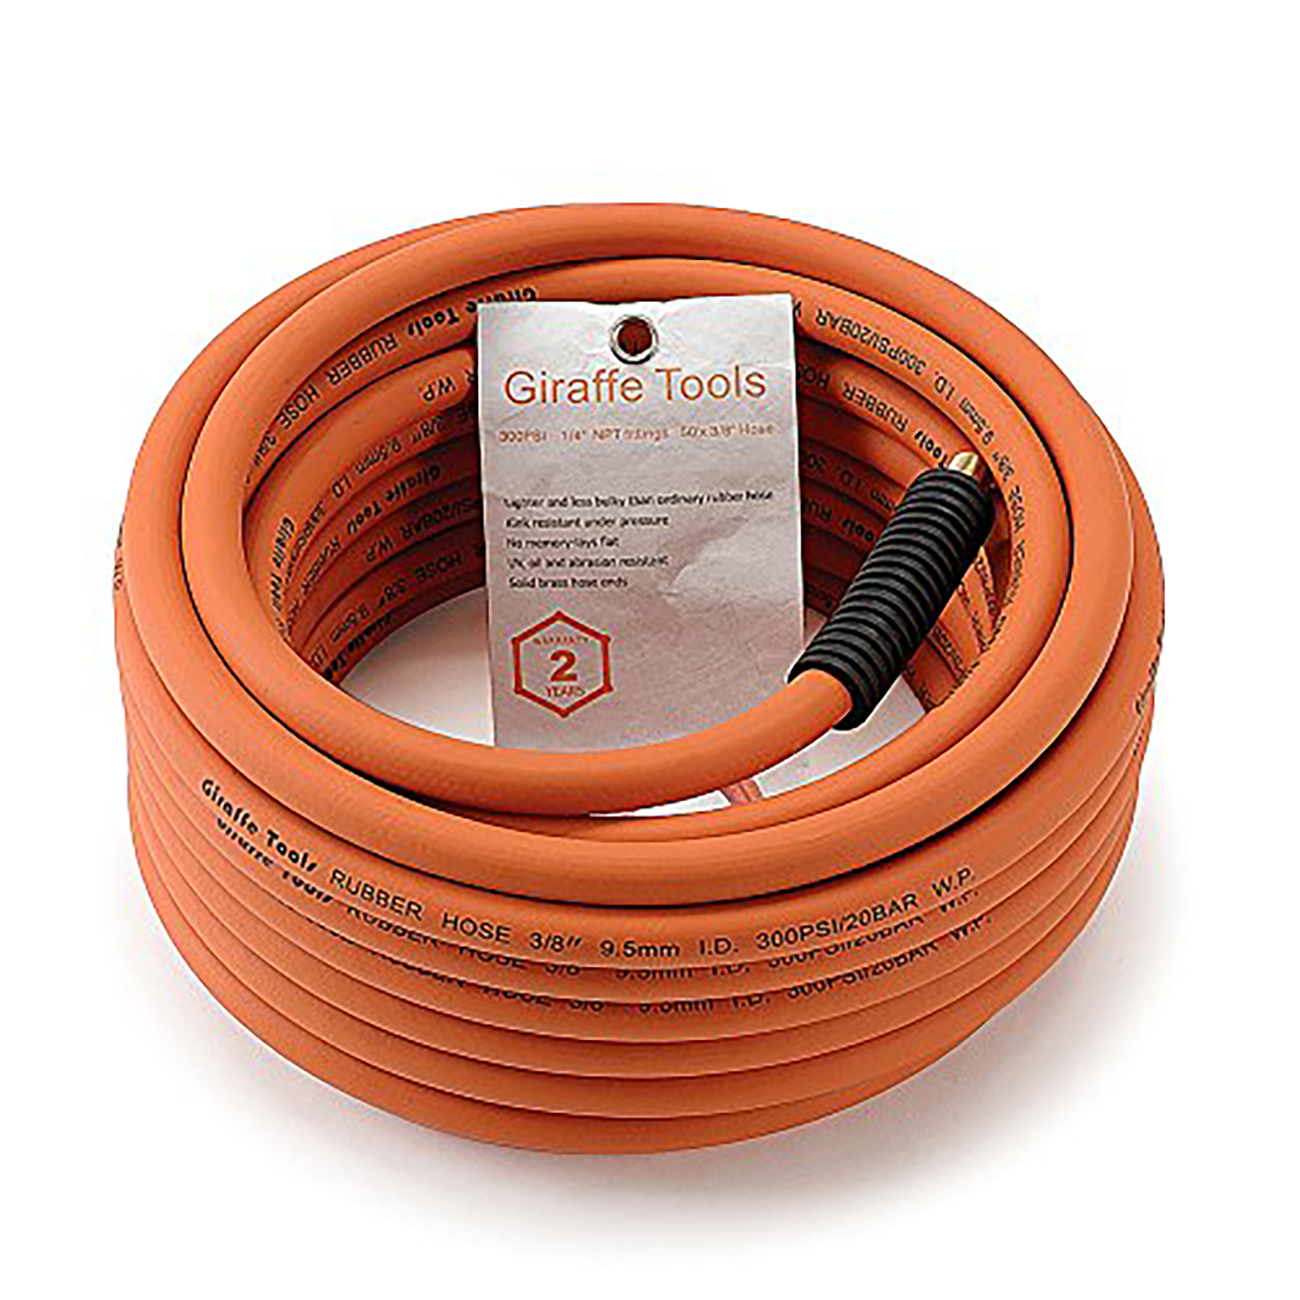 

Giraffe Tools Rubber Air Hose, 3/8 Inch X 6-50 Ft, 1/4 In. Mnpt Fittings, 300 Psi Heavy Duty, Lightweight Air